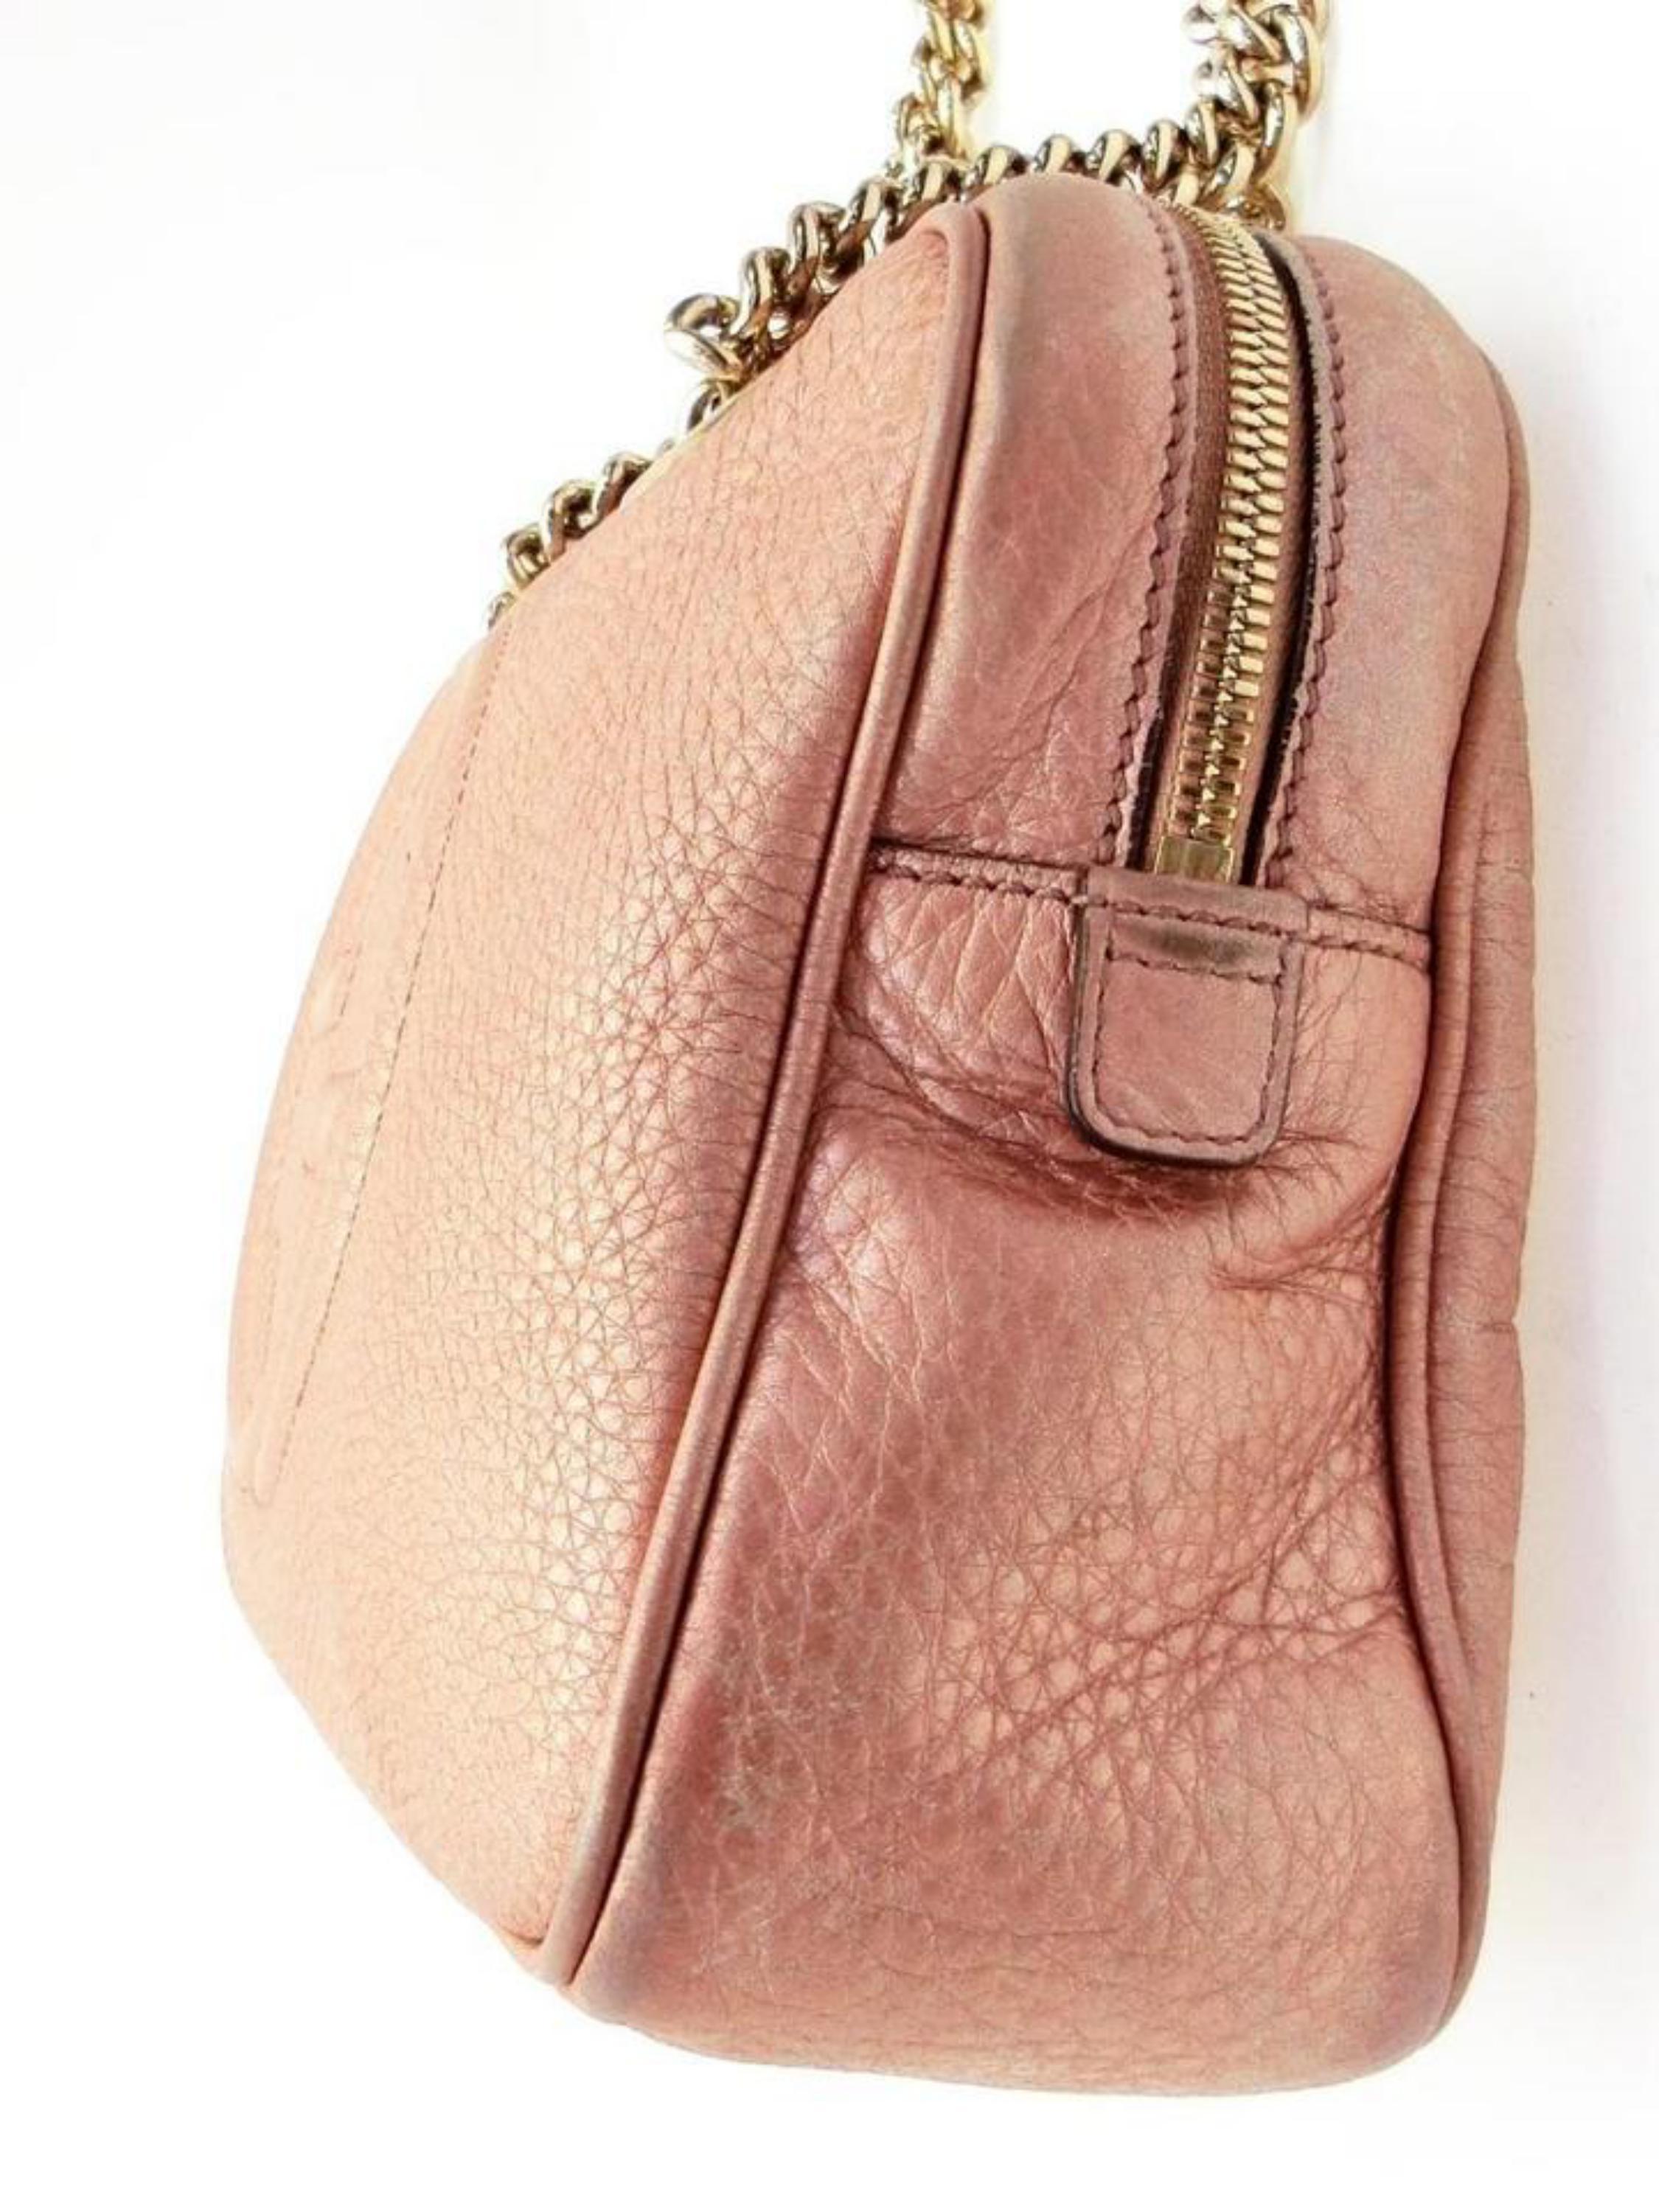 Women's Gucci Soho (Ultra Rare) Chain Camera 227986 Pink Leather Shoulder Bag For Sale